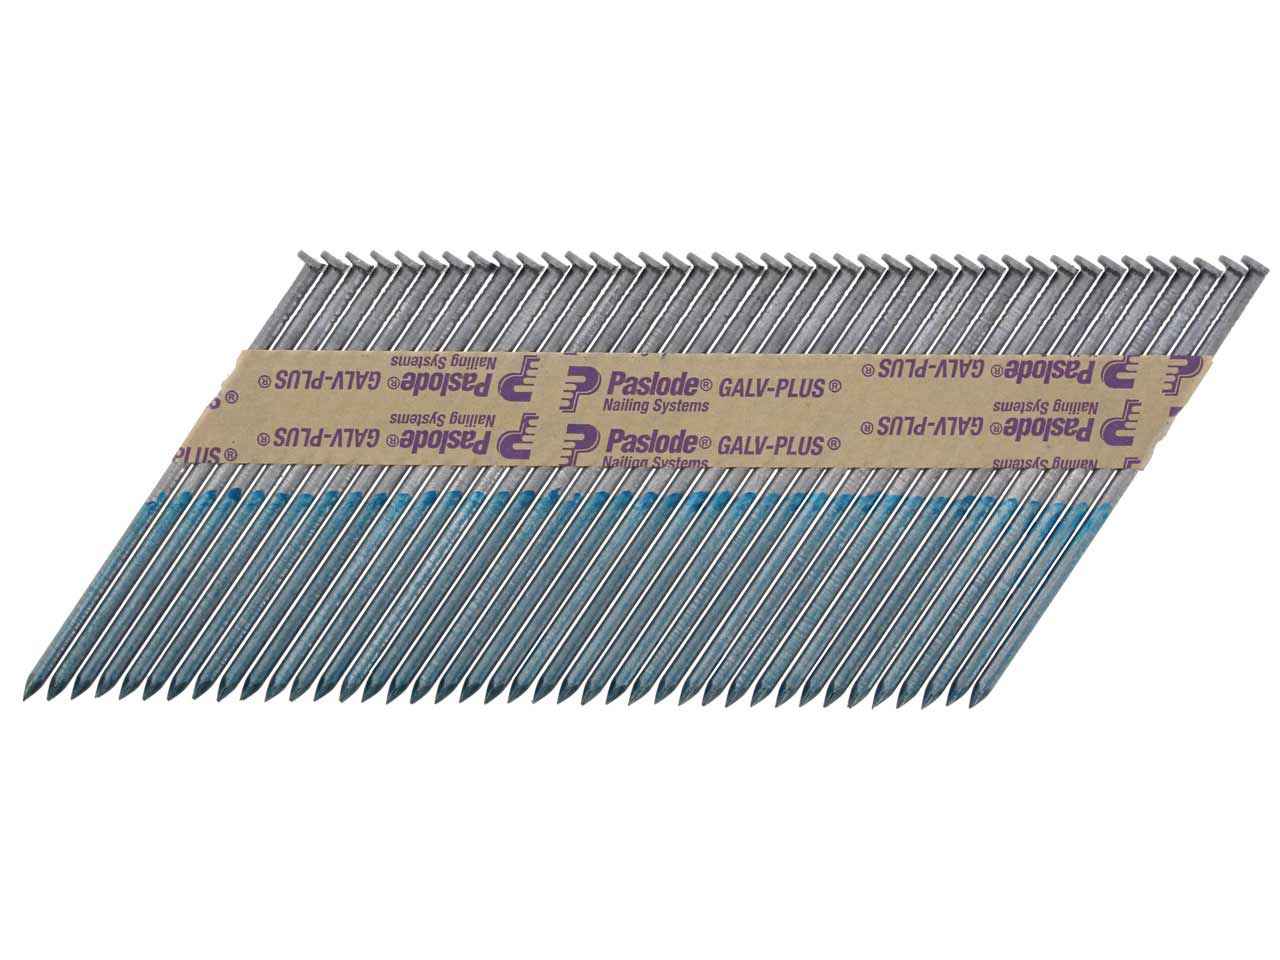 Paslode 141074 IM360 3.1mm x 90mm Galvanised Nails - Pack of 2200 & 2 Fuel  Cells | Paslode | NYEs